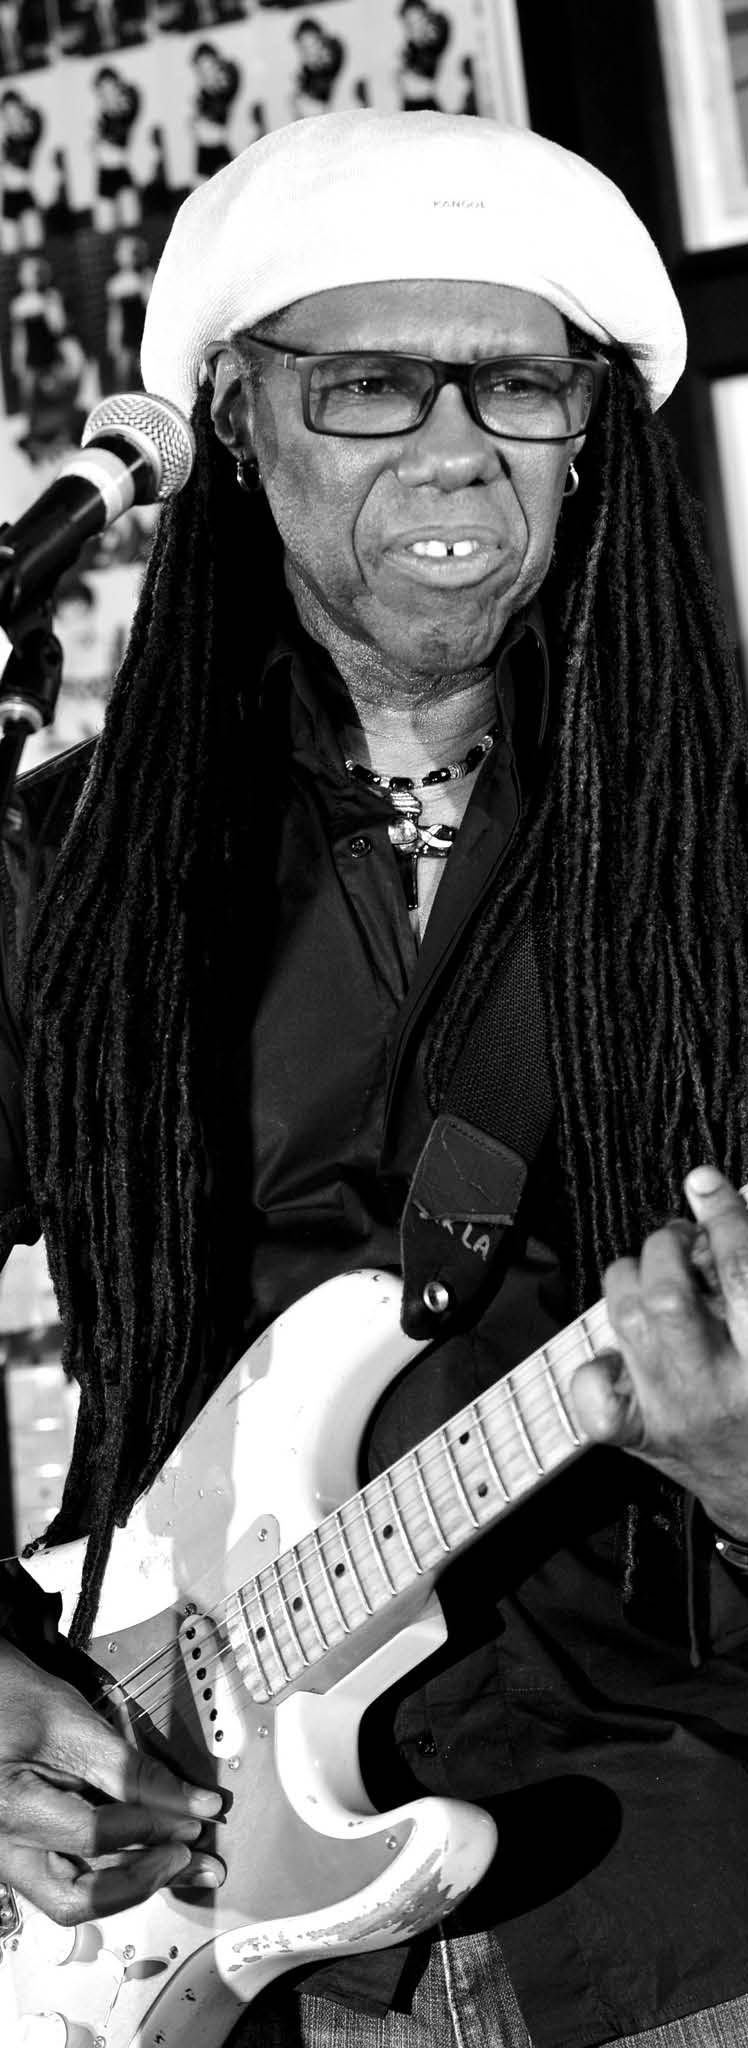 BURBANK, CA - MARCH 13: (EDITORS NOTE: Image was shot in black and white. Color version not available.) Musician Nile Rodgers appears onstage for a Q&A and to perform at a "Disco Party" at Warner Brothers Records on March 13, 2015 in Burbank, California.   Kevin Winter, Image: 226757433, License: Rights-managed, Restrictions: (EDITORS NOTE: Image was shot in black and white. Color version not available.), Model Release: no, Credit line: Profimedia, AFP